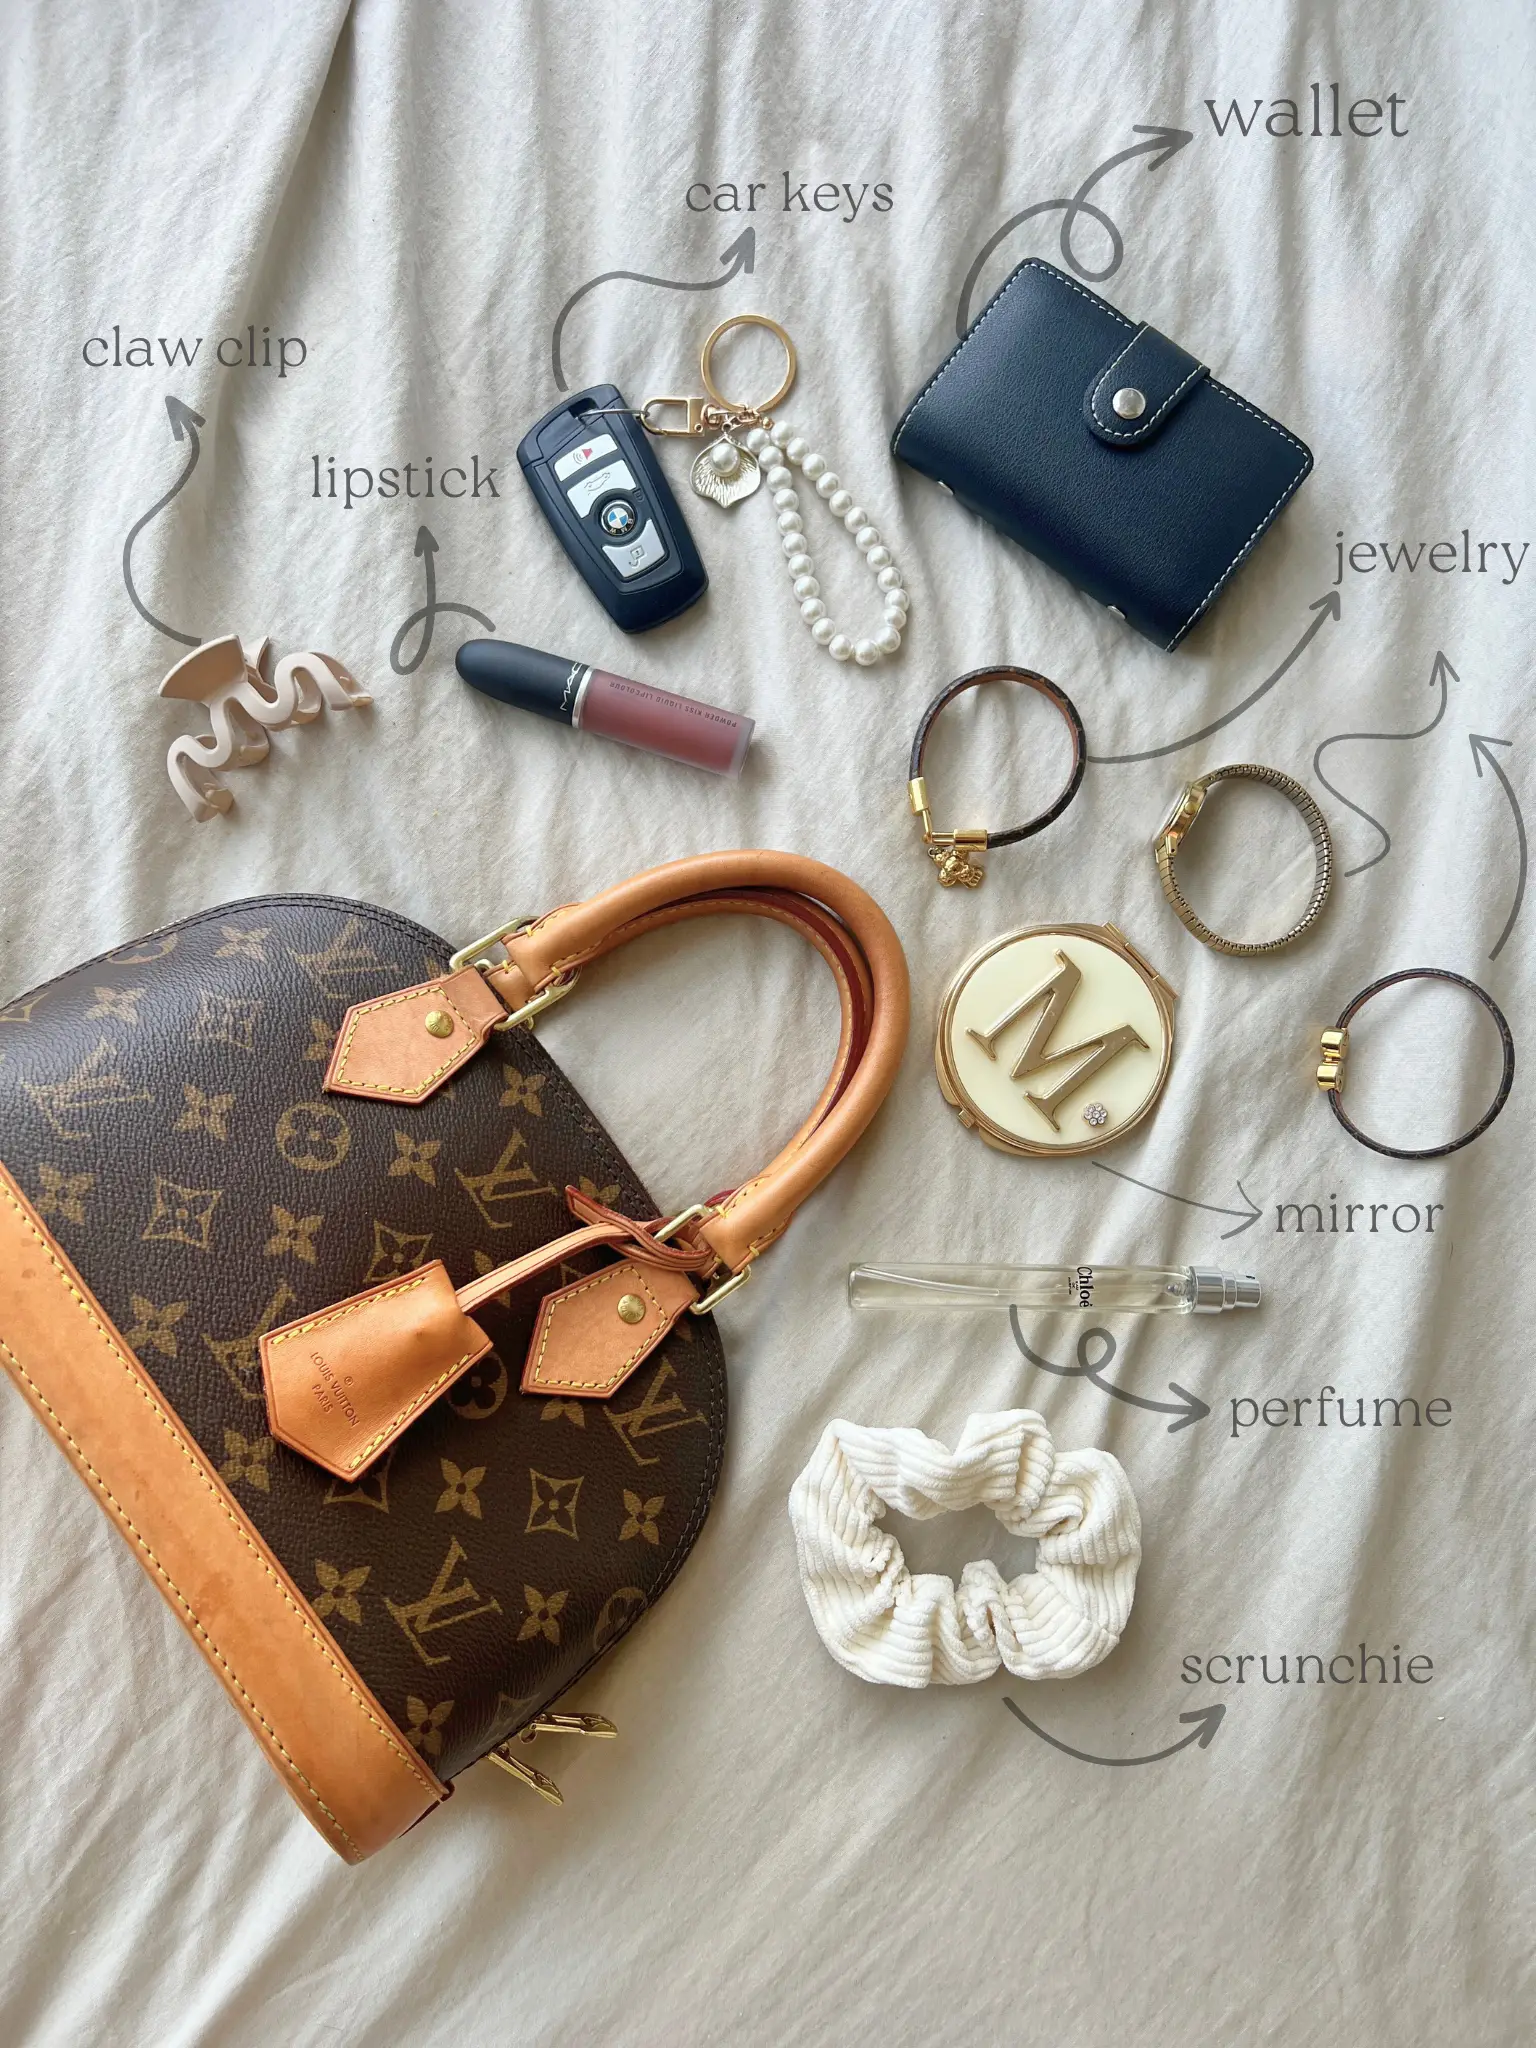 WHAT'S IN MY BAG? ✨ Louis Vuitton Alma BB, Gallery posted by éternelle  luxe